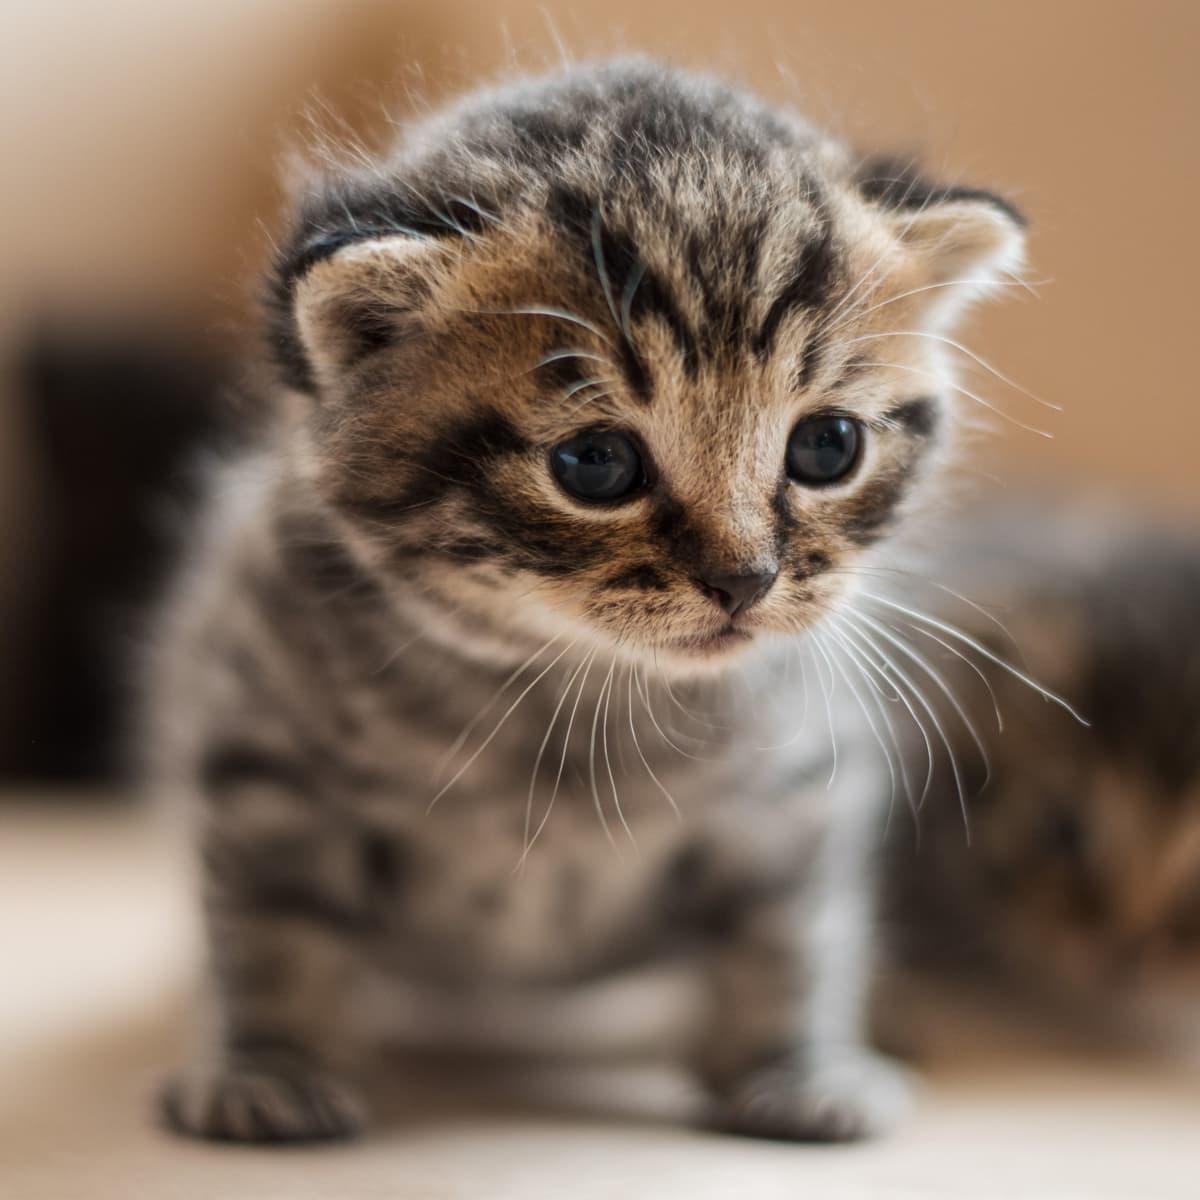 Top 10 Cutest Cat Pictures of All Time + Honorable Mentions ...